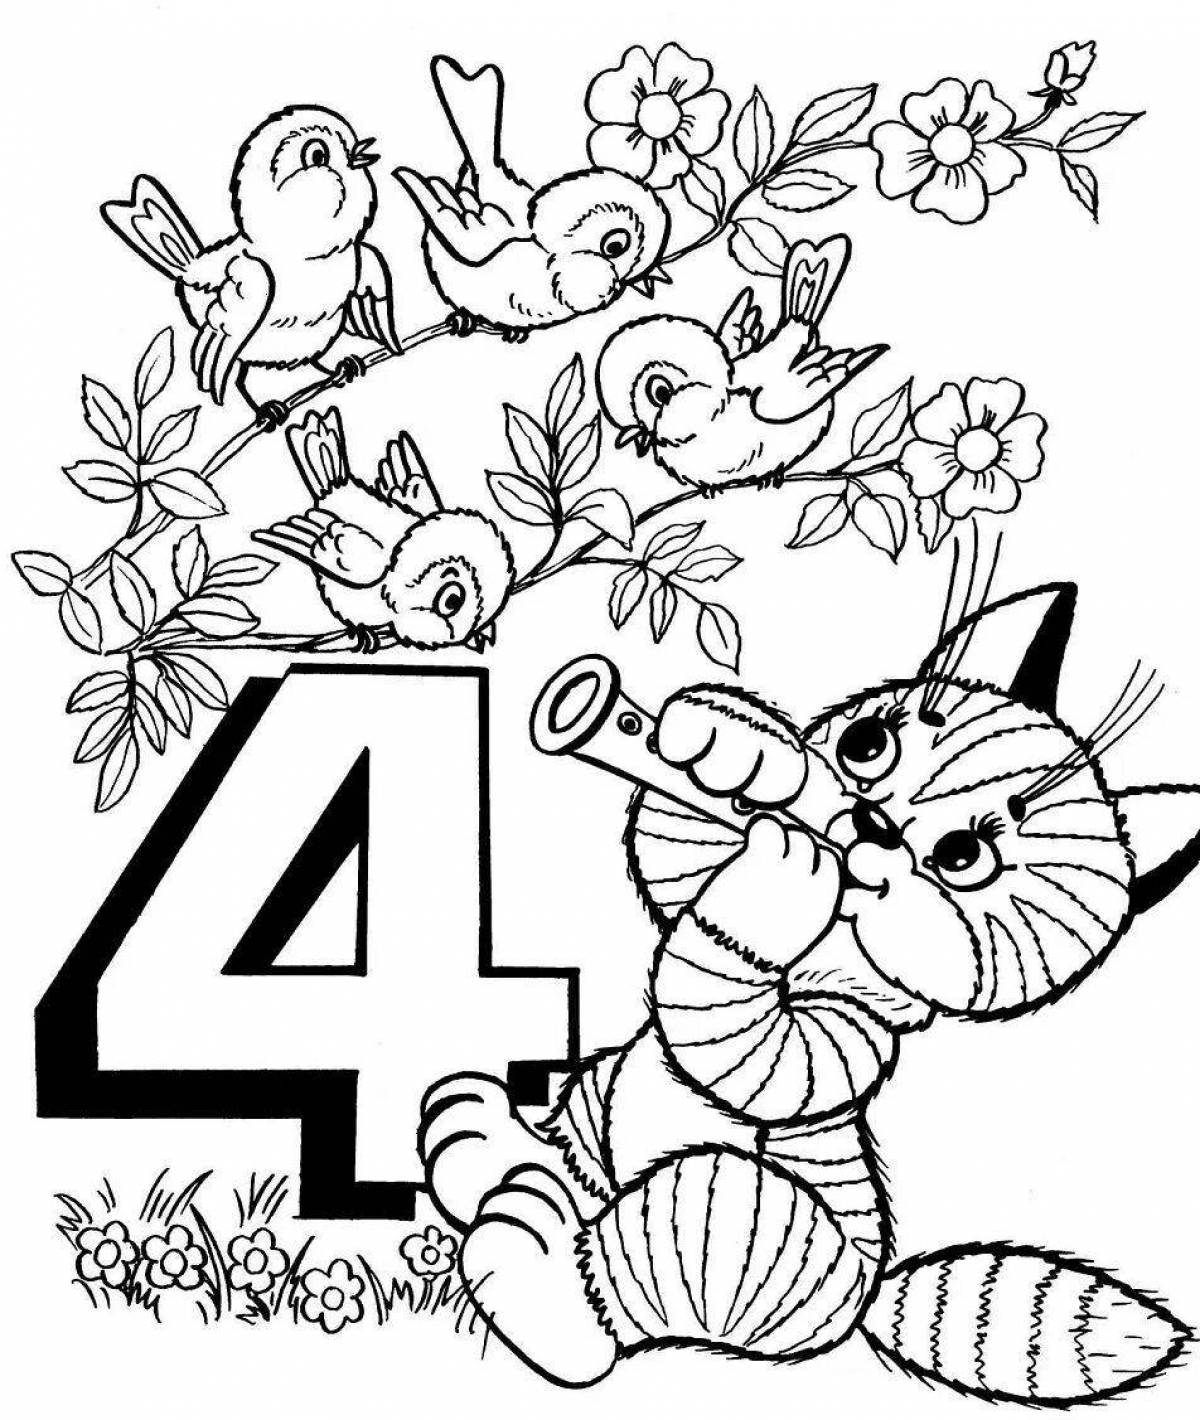 Creative number and letter combination coloring page for kids